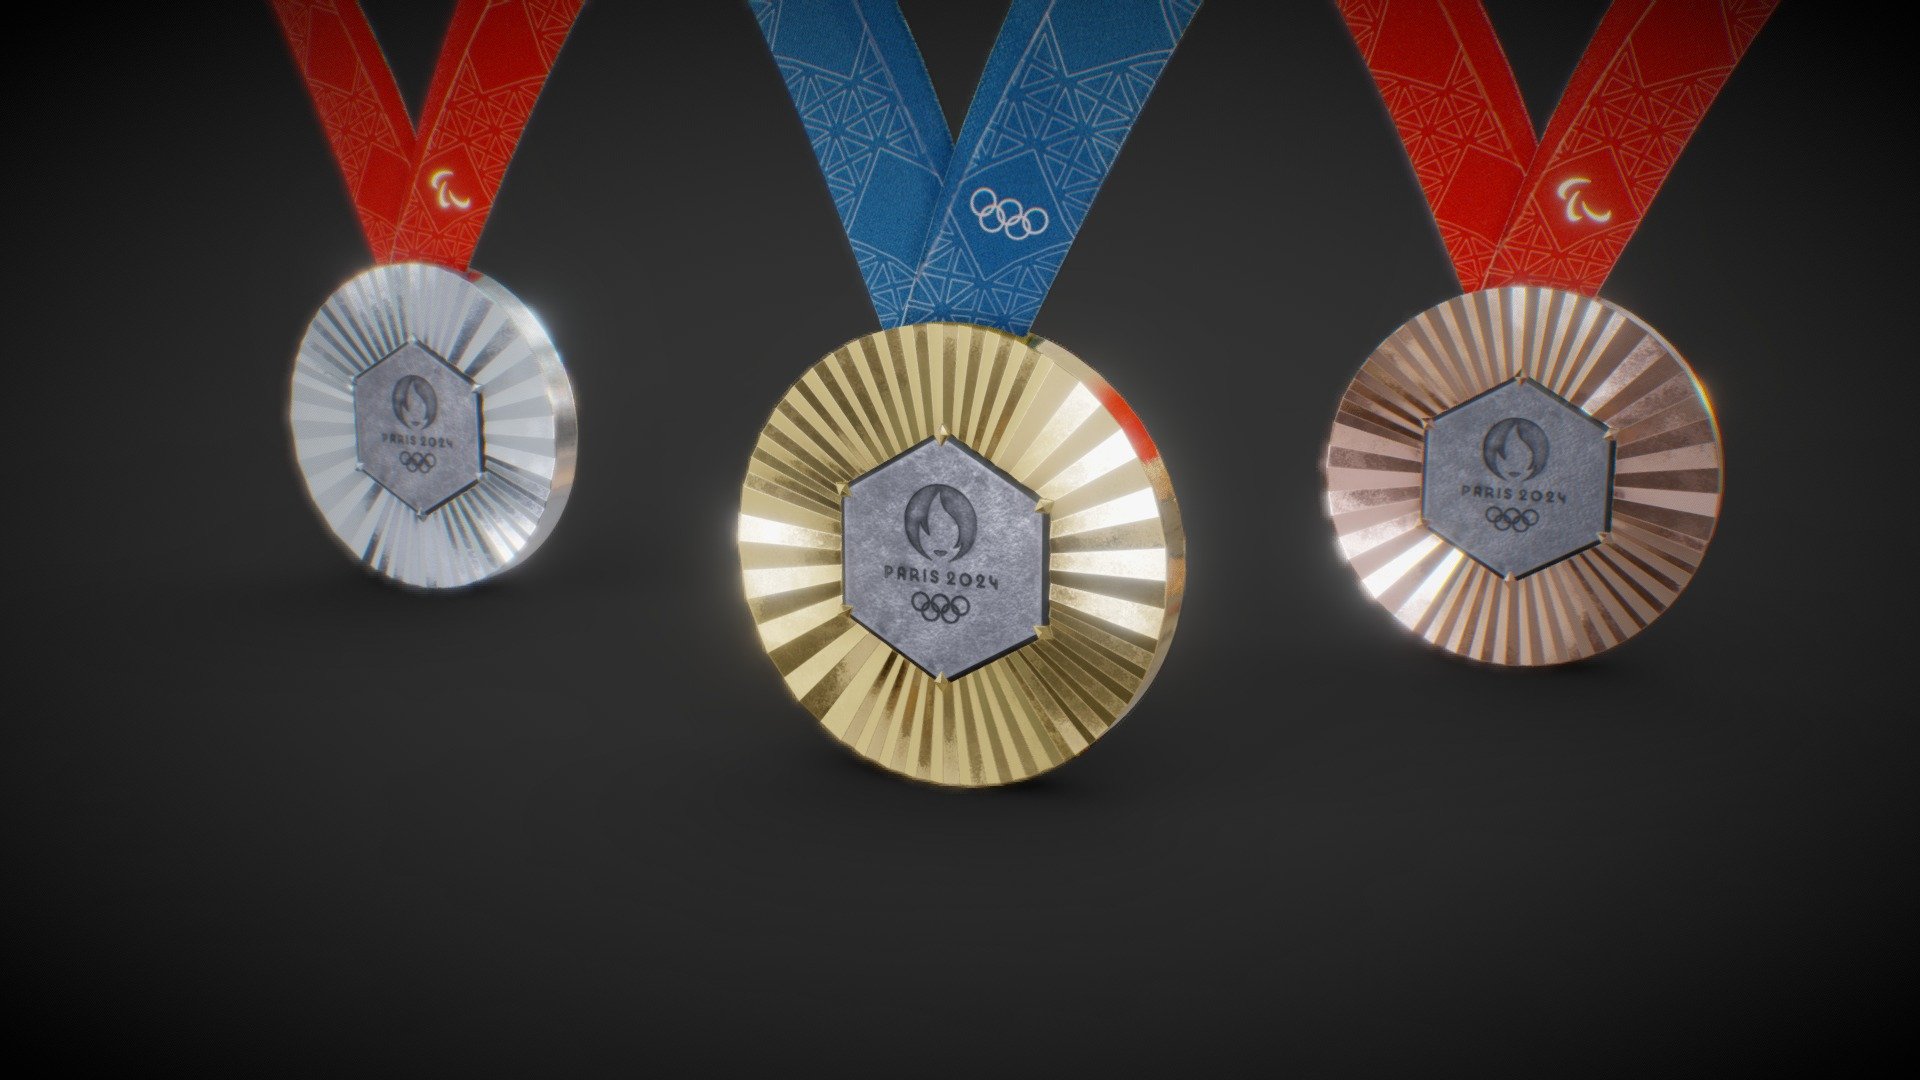 The medals for the Paris 2024 Summer Olympics will have a unique design featuring a piece of the original iron from the Eiffel Tower, symbolizing a strong connection to one of France's most iconic landmarks. The medals will incorporate a hexagon-shaped piece of iron, echoing the contours of mainland France, and are intended to be a memorable souvenir for the athletes. This iron comes from maintenance offcuts of the Eiffel Tower, ensuring each medal contains a bit of French history.

Subdivision ready model High Quality 4K PBR textures For all 3 Gold, Silver, Bronze Medals
High poly Model and 3D Printing file are included in the Additional files

Perfect for any Purpose
Feel free to DM me for any question or custom requests :) - Official Paris 2024 Summer Olympics Medals - Buy Royalty Free 3D model by Deftroy 3d model